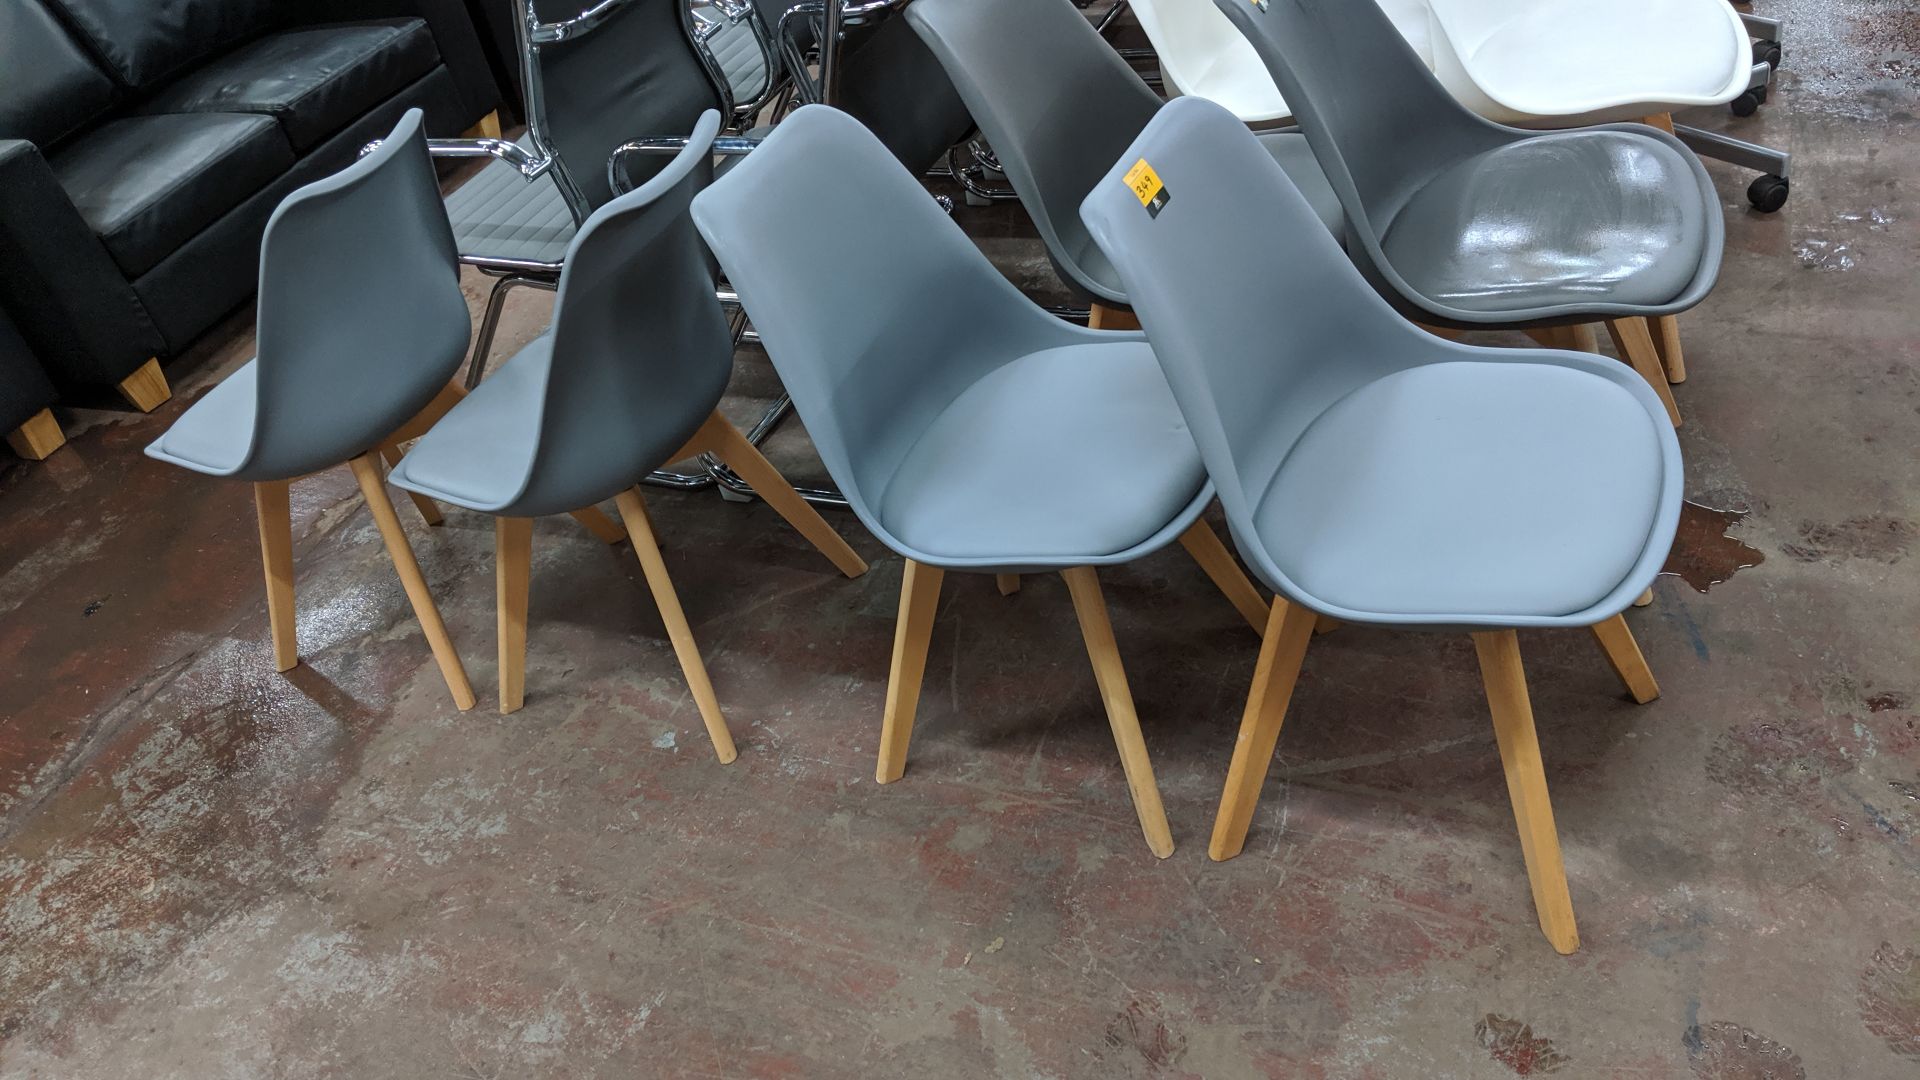 4 off grey/blue chairs on wooden legs with upholstered seat bases NB. Lots 347 - 349 consist of